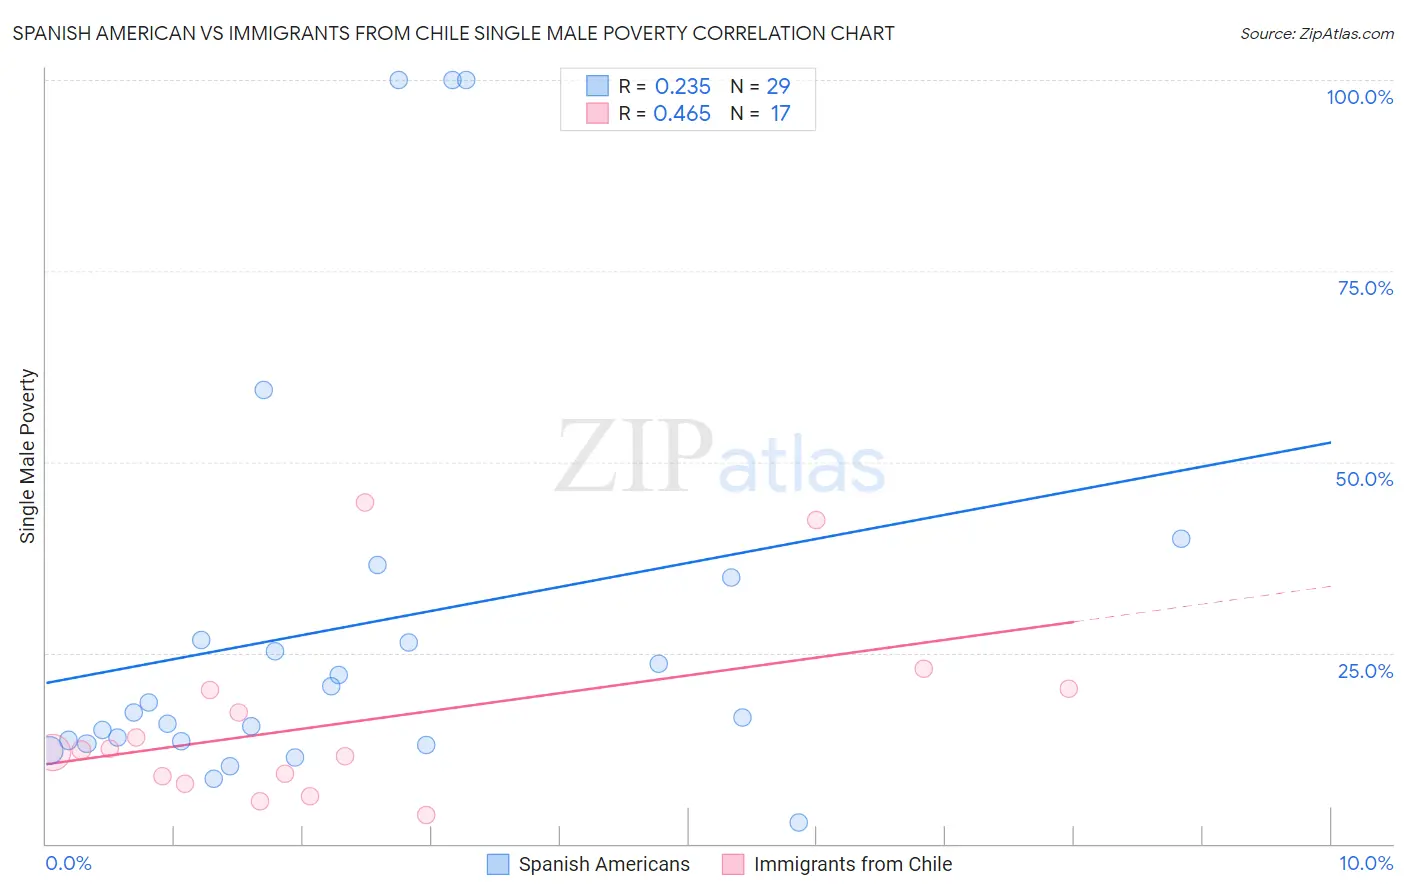 Spanish American vs Immigrants from Chile Single Male Poverty